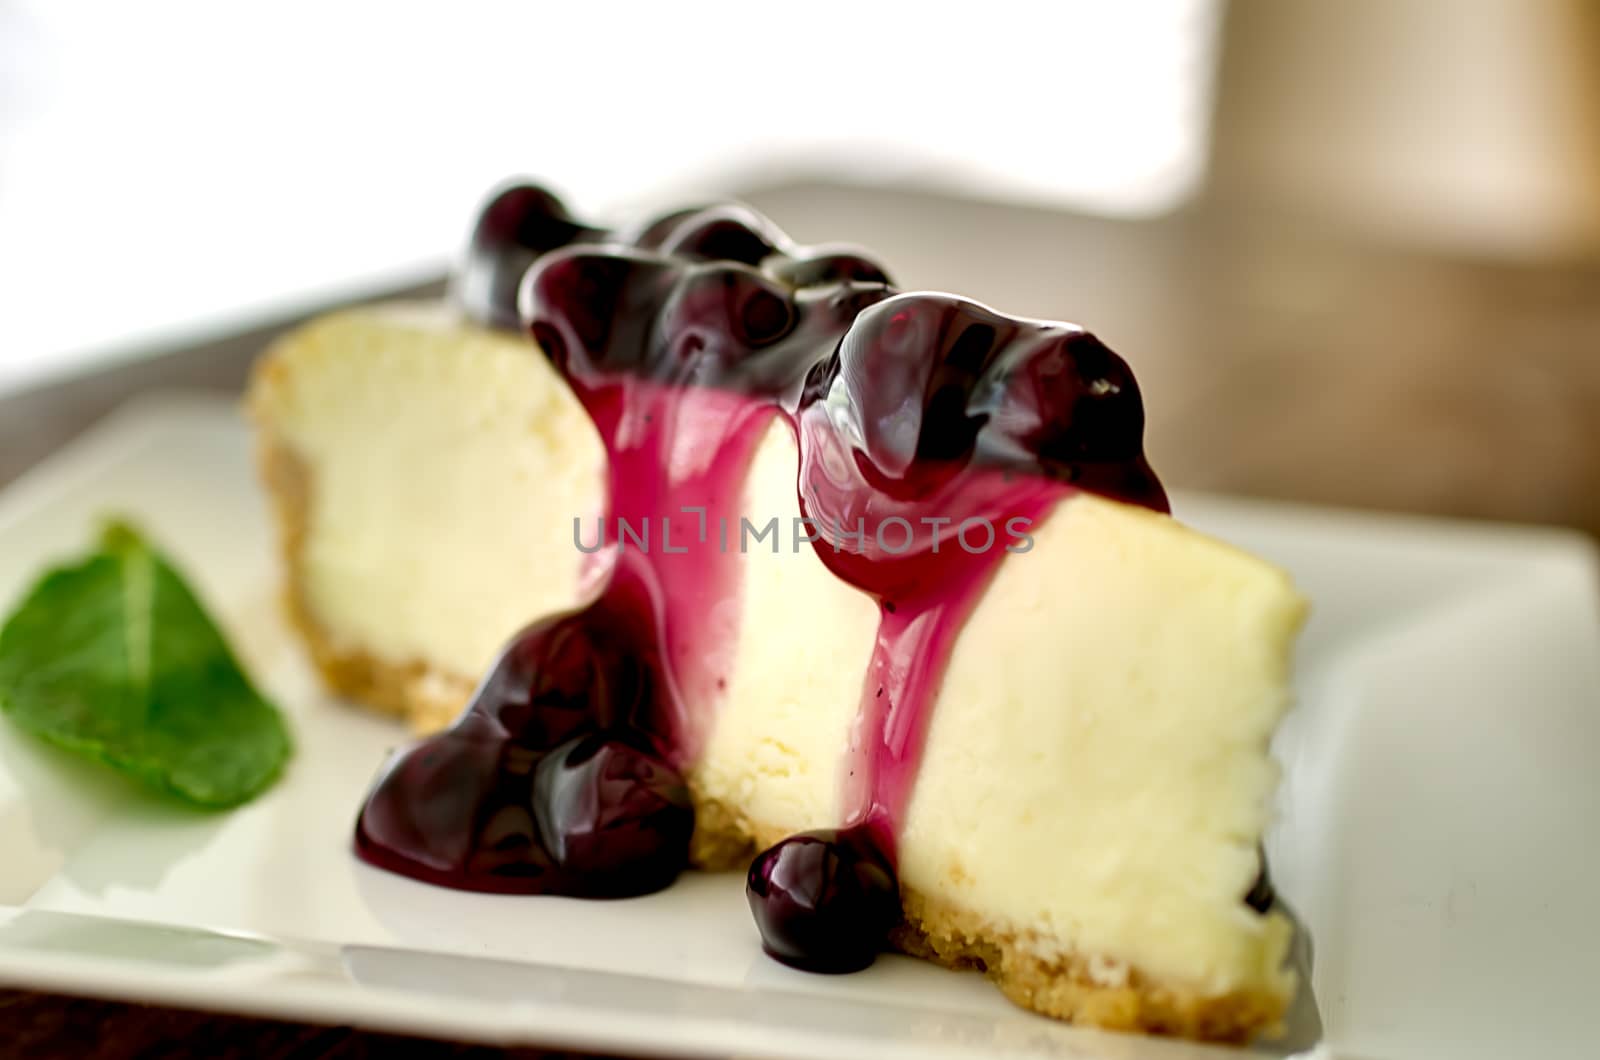 Slice of blueberry cheesecake in the afternoon with mint garnish.  Shallow depth of field.